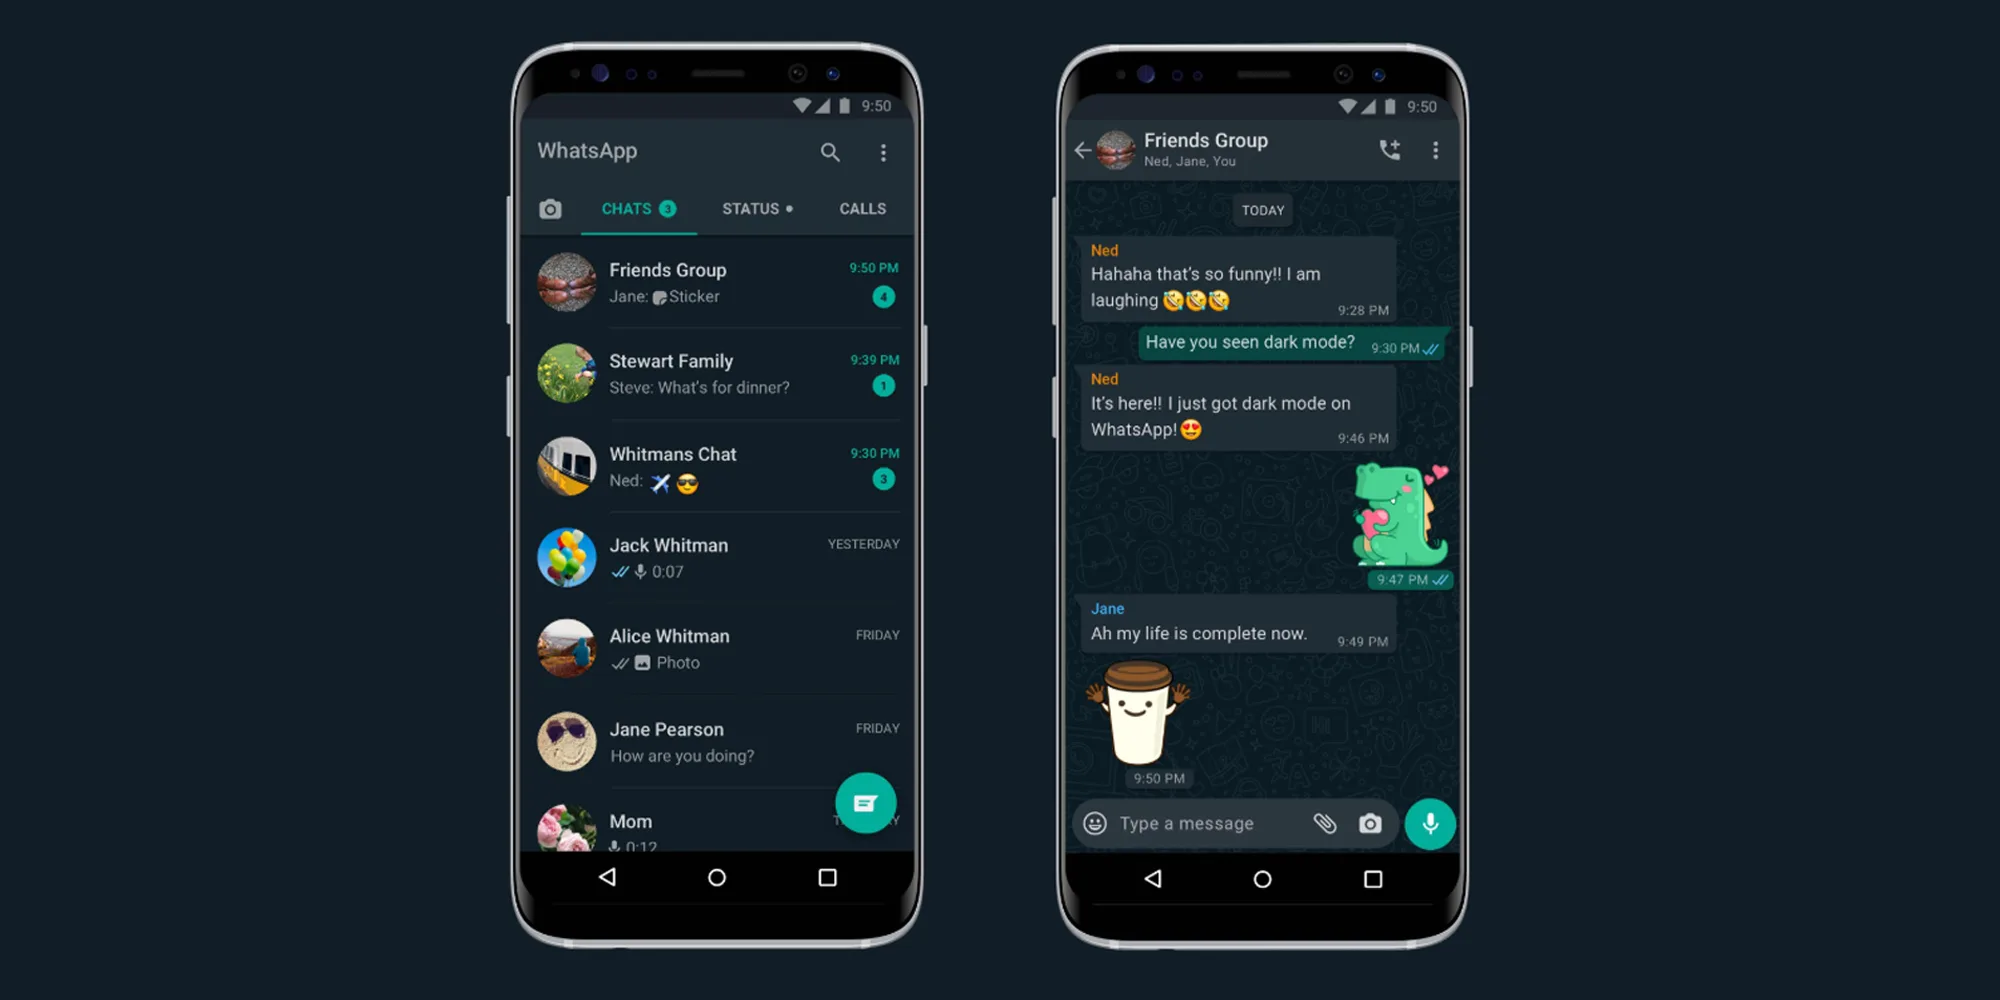 Dedicated dark mode officially rolling out for WhatsApp - 9to5Google